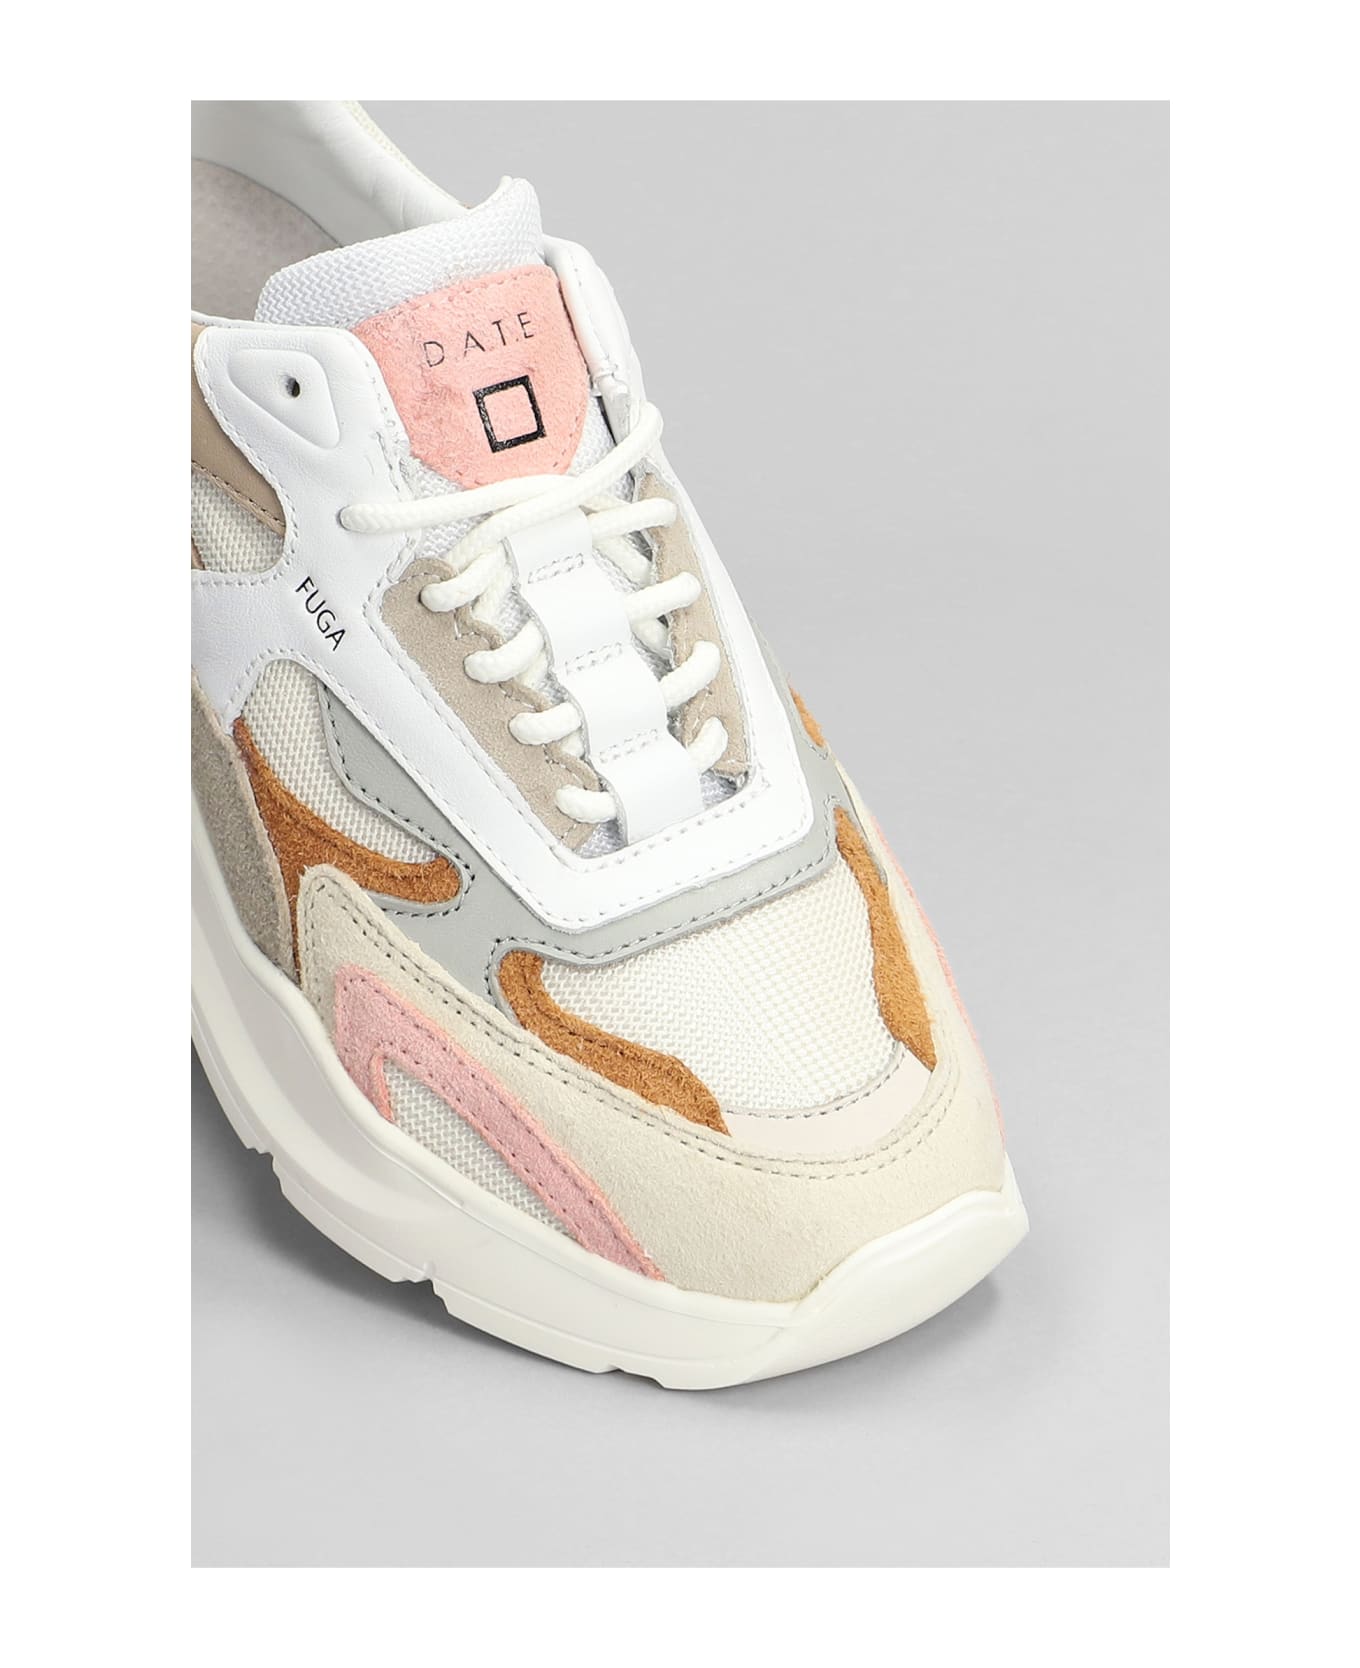 D.A.T.E. Fuga Sneakers In Beige Suede And Fabric - beige